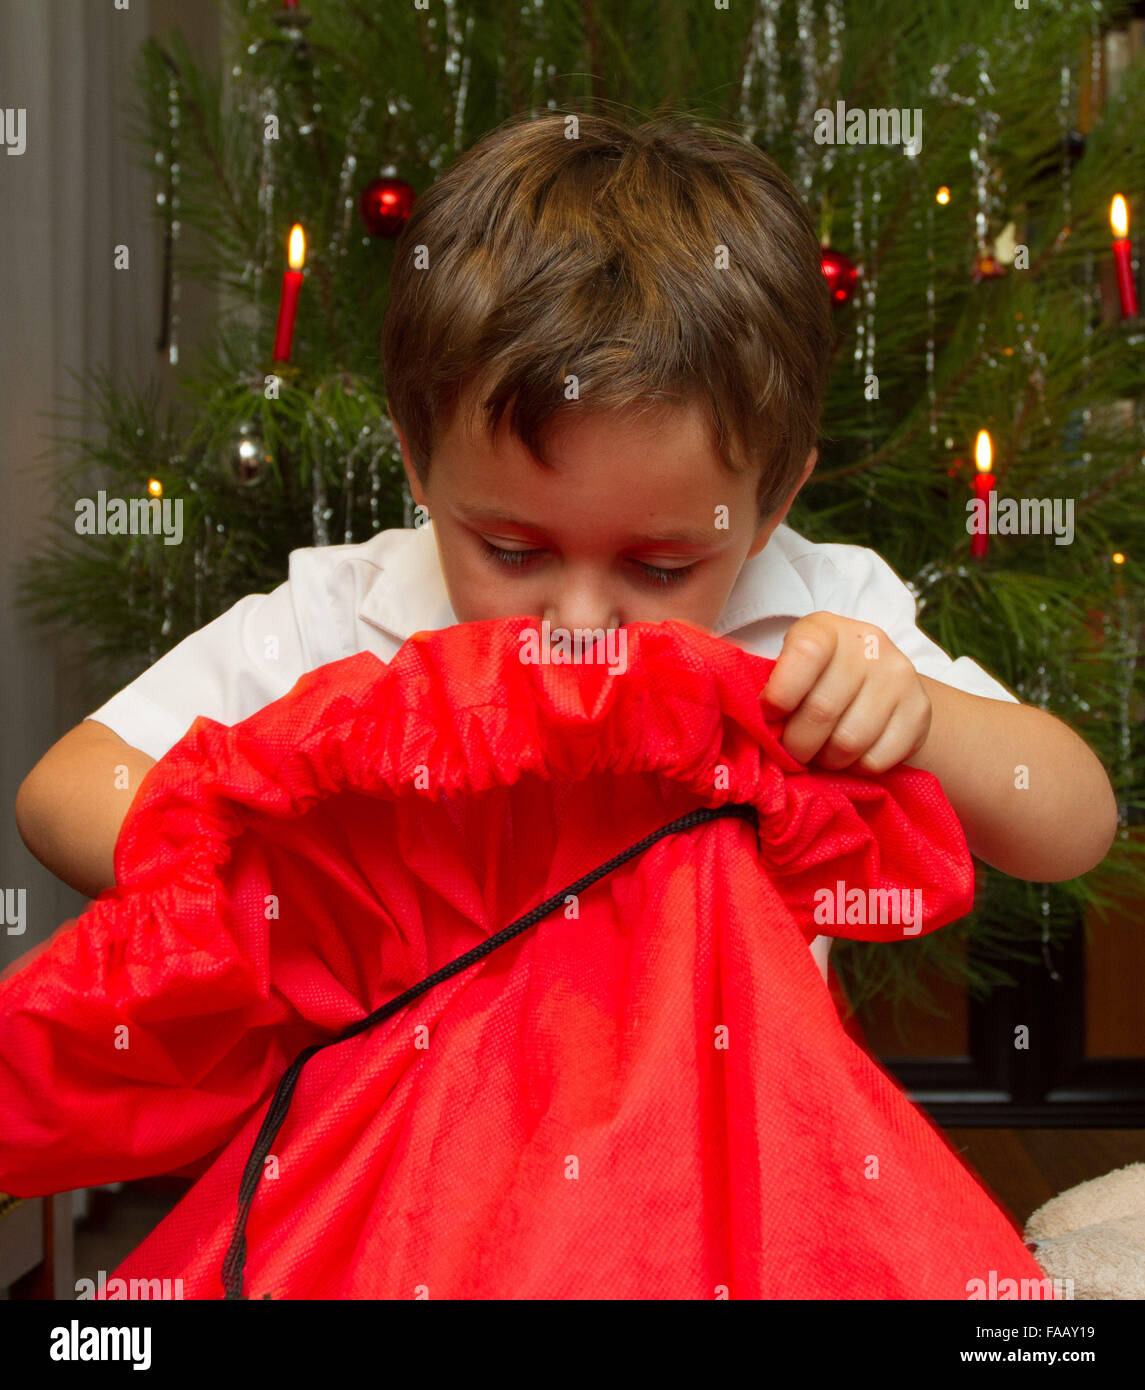 Young boy opening christmas present in front of tree with candles. Stock Photo